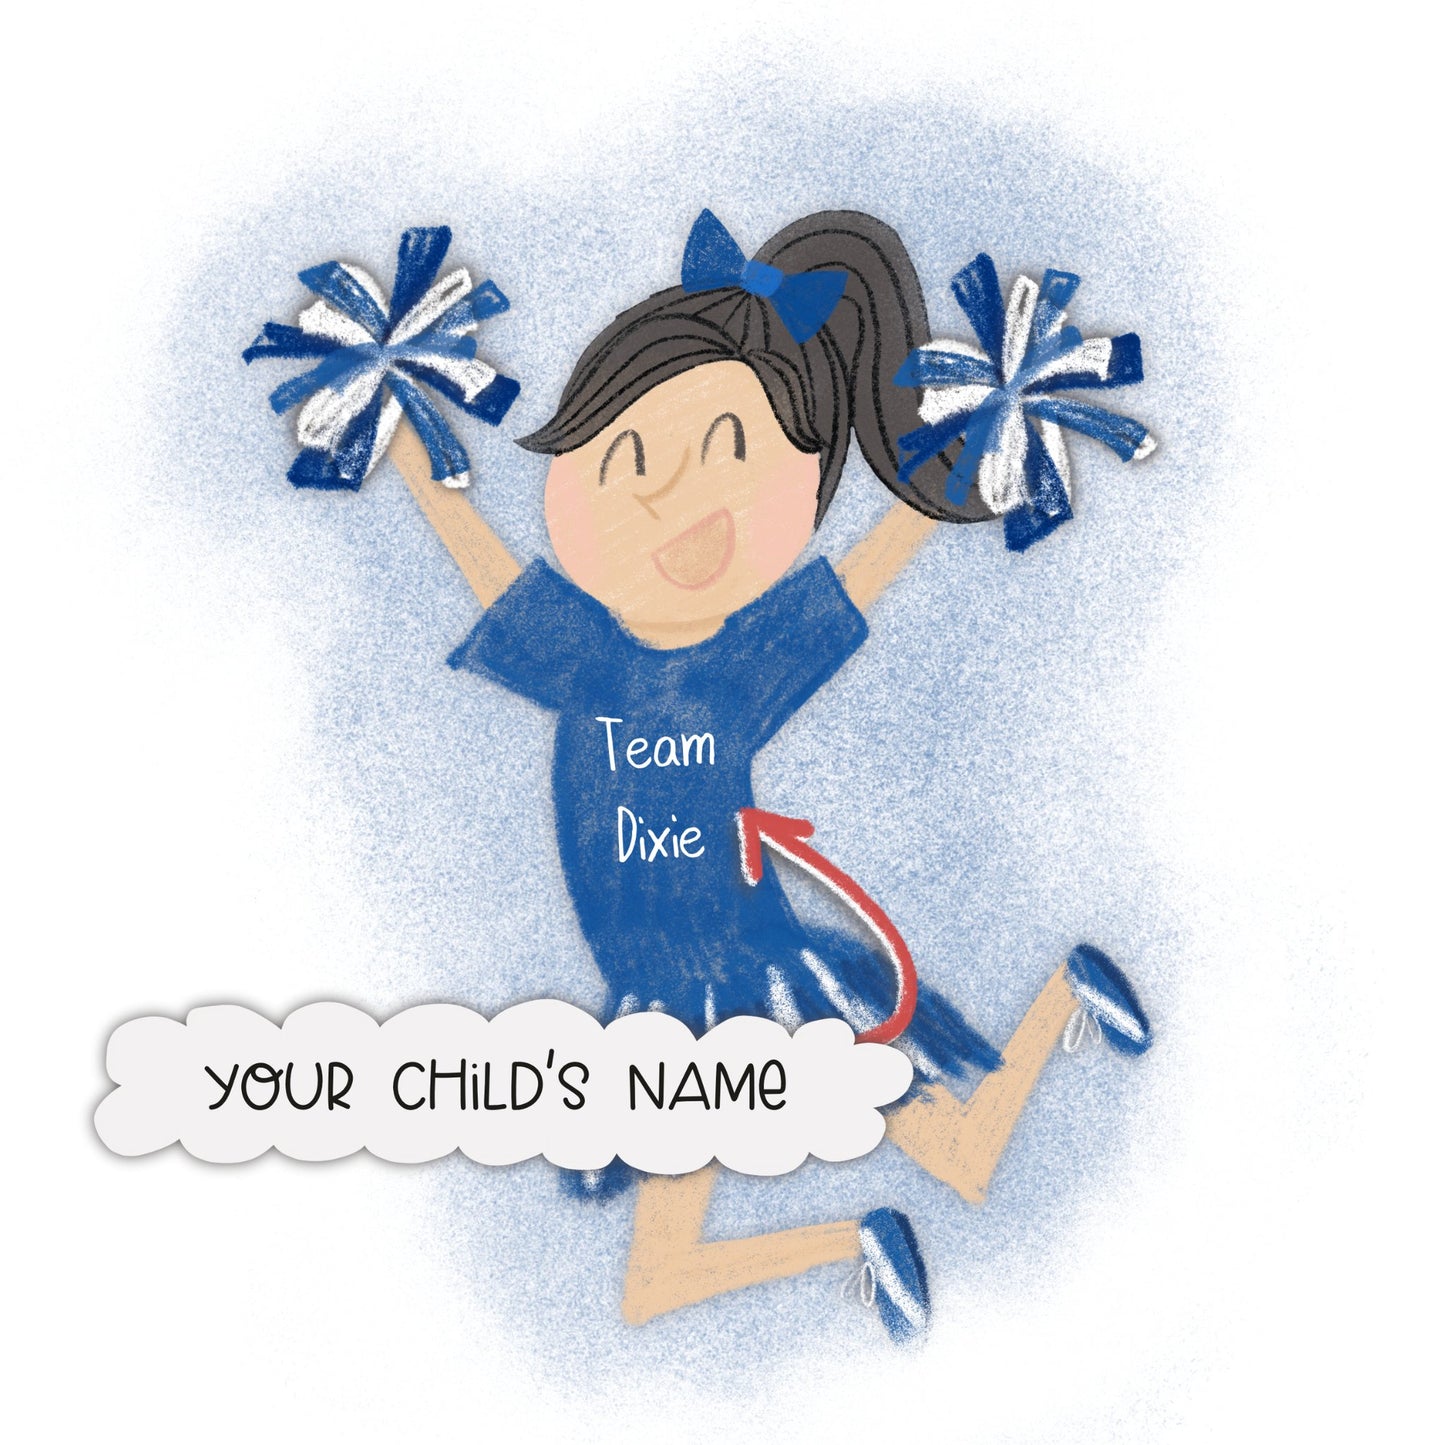 An example page from the self-published personalized book called “You’re More Than My Teacher” featuring a cheerleader. The child’s name will be inserted on the cheerleader’s uniform